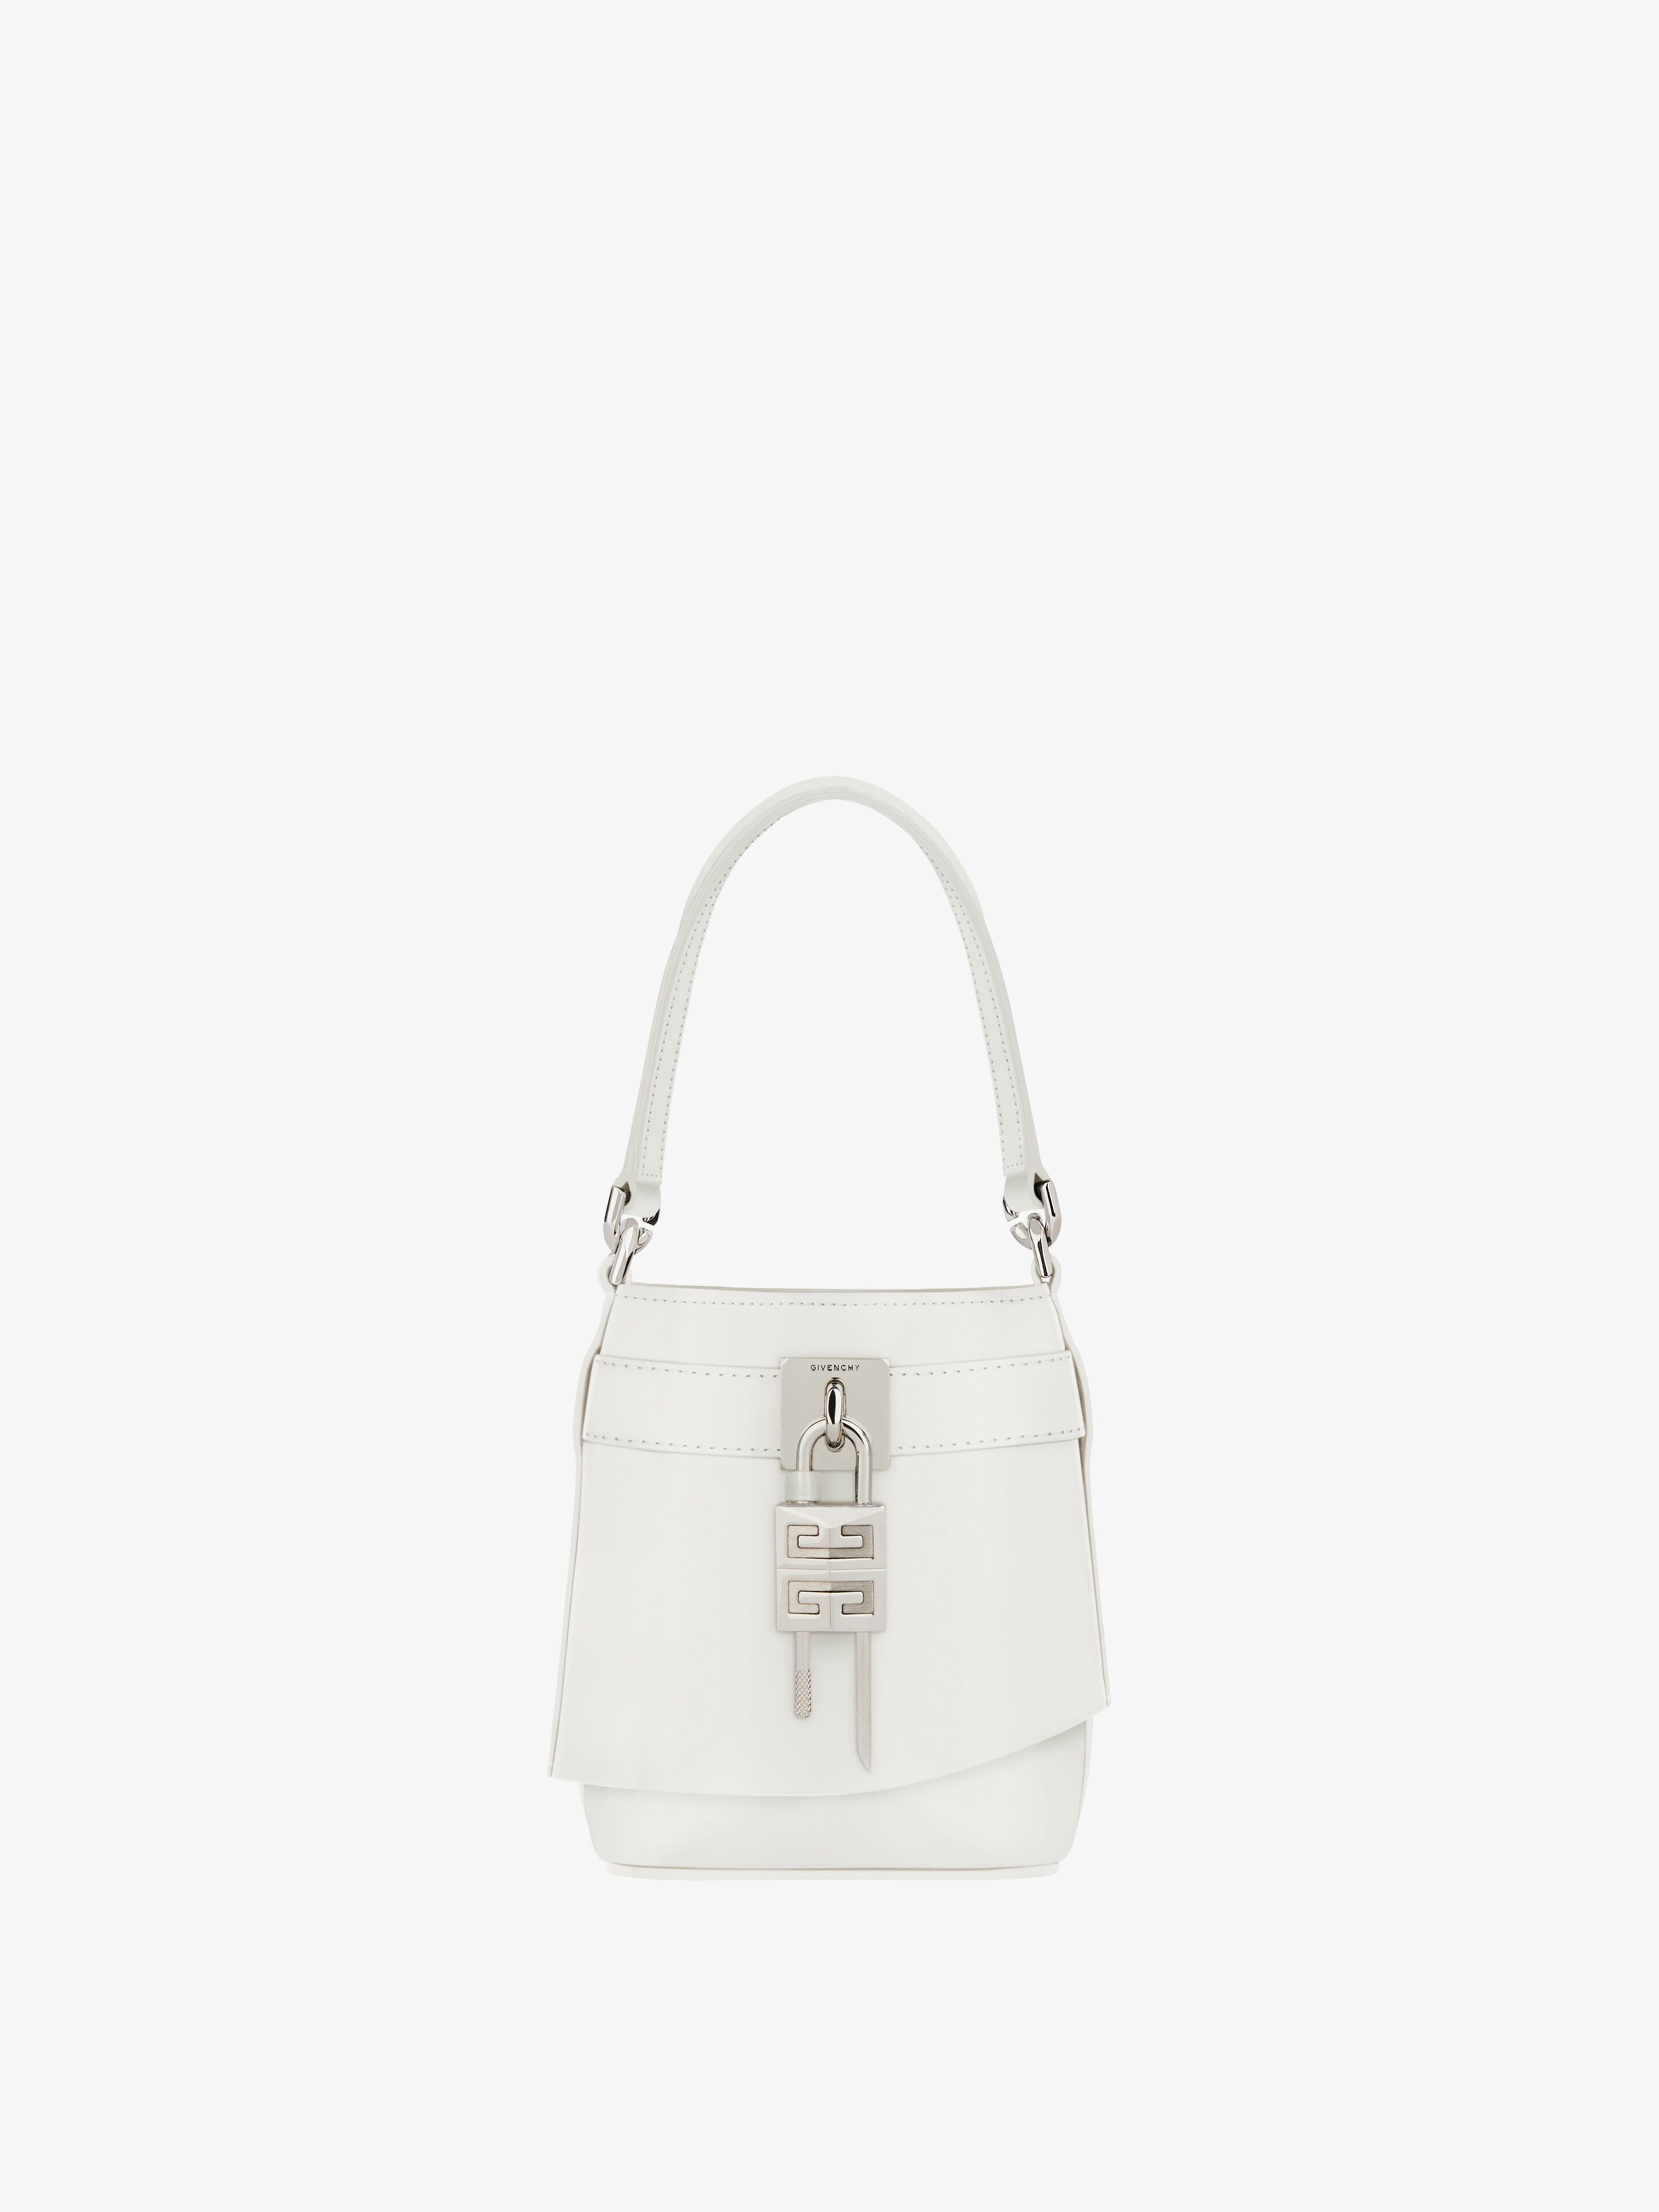 Givenchy Women's Micro Shark Lock Bucket Bag In Box Leather In Multicolor